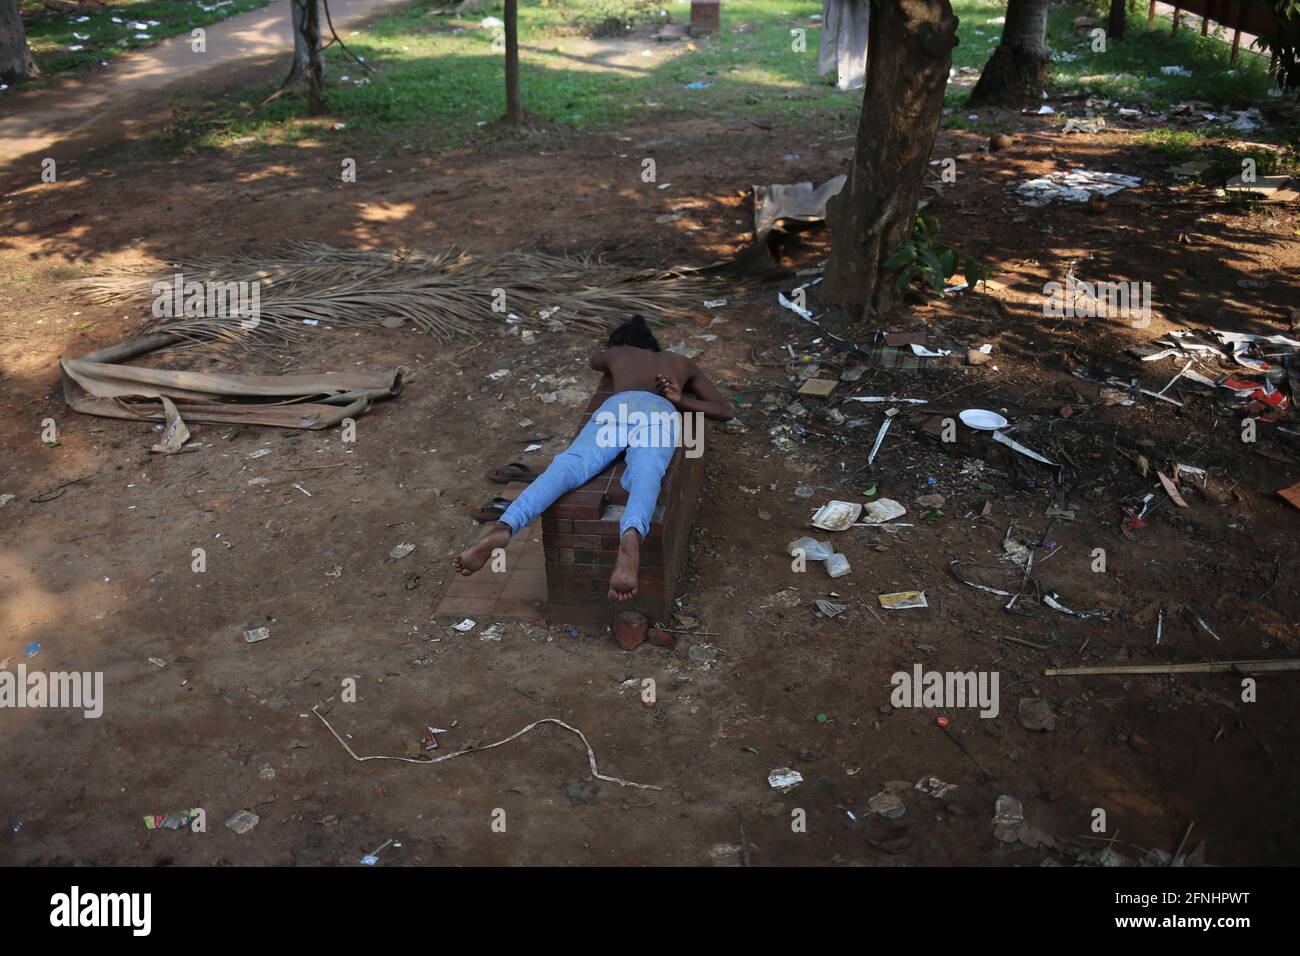 Dhaka, Bangladesh. 17th May, 2021. A homeless person is sleeping on a bench of a park during the 2nd wave of COVID-19 pandemic in Dhaka, Bangladesh on May 17, 2021. Credit: Md. Rakibul Hasan/ZUMA Wire/Alamy Live News Stock Photo